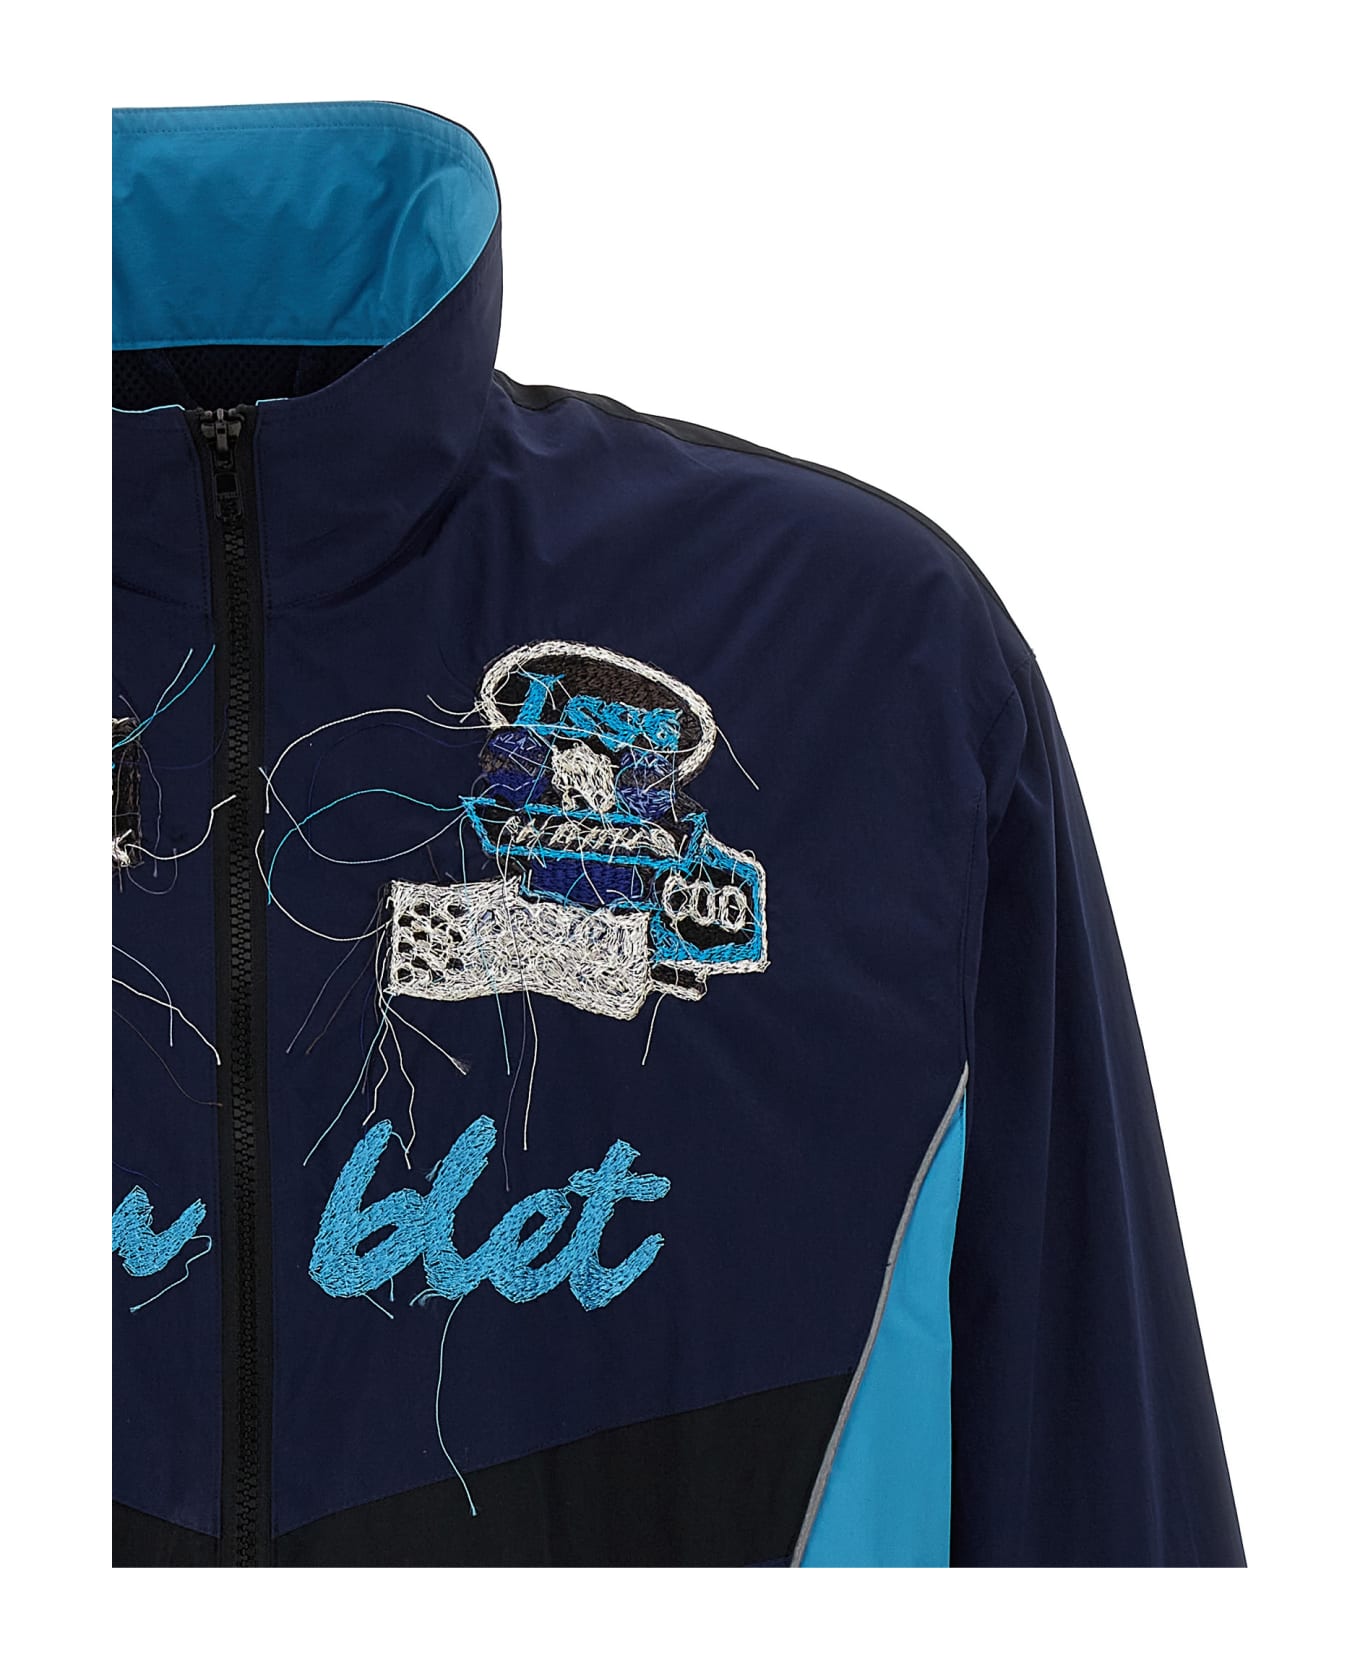 doublet 'a.i. Patches Embroidery' Jacket - Blue